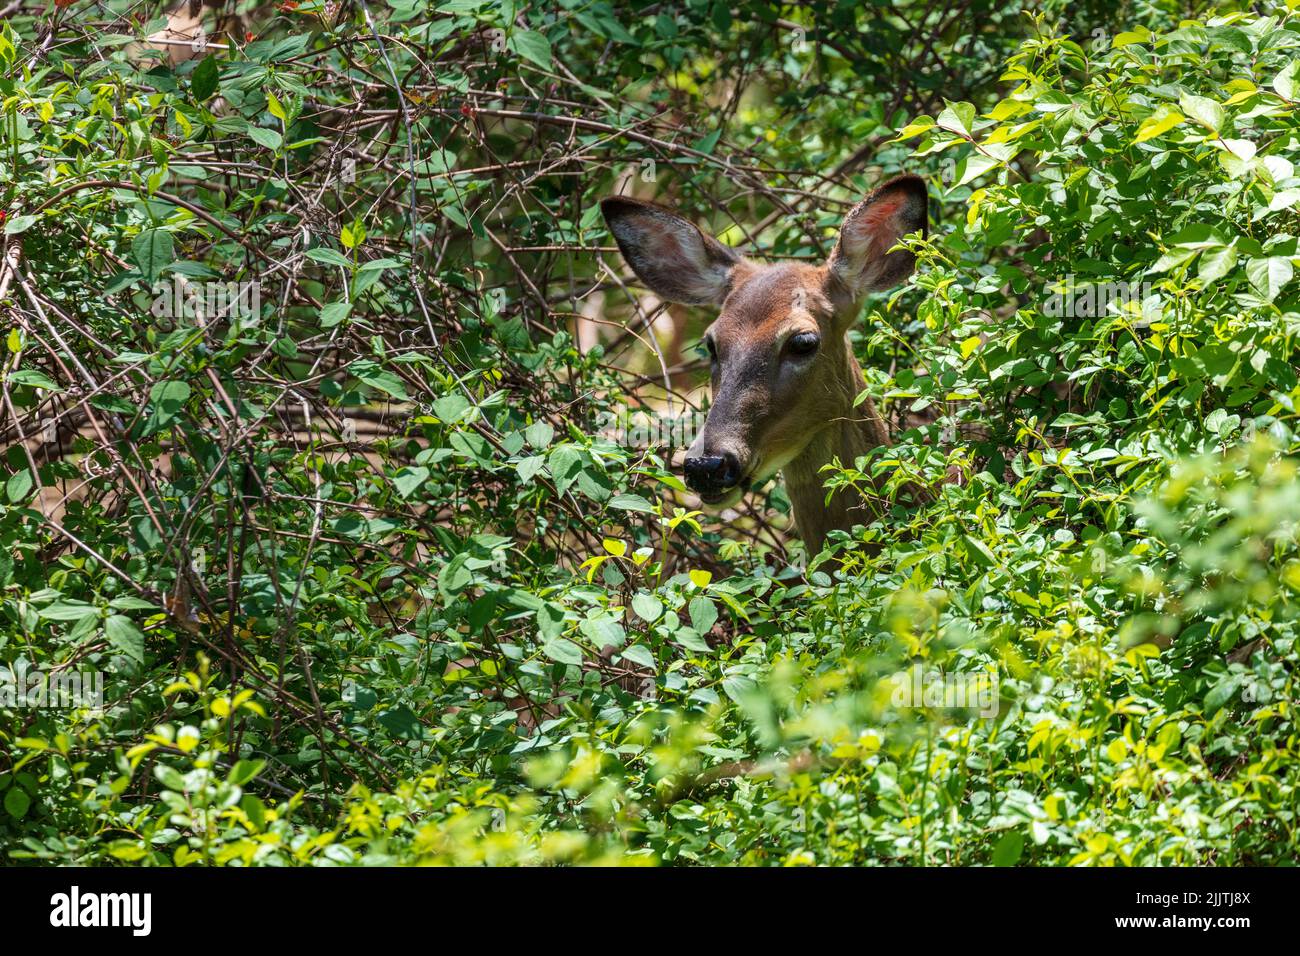 A cute deer hiding behind the bushes with green leaves in the forest Stock Photo